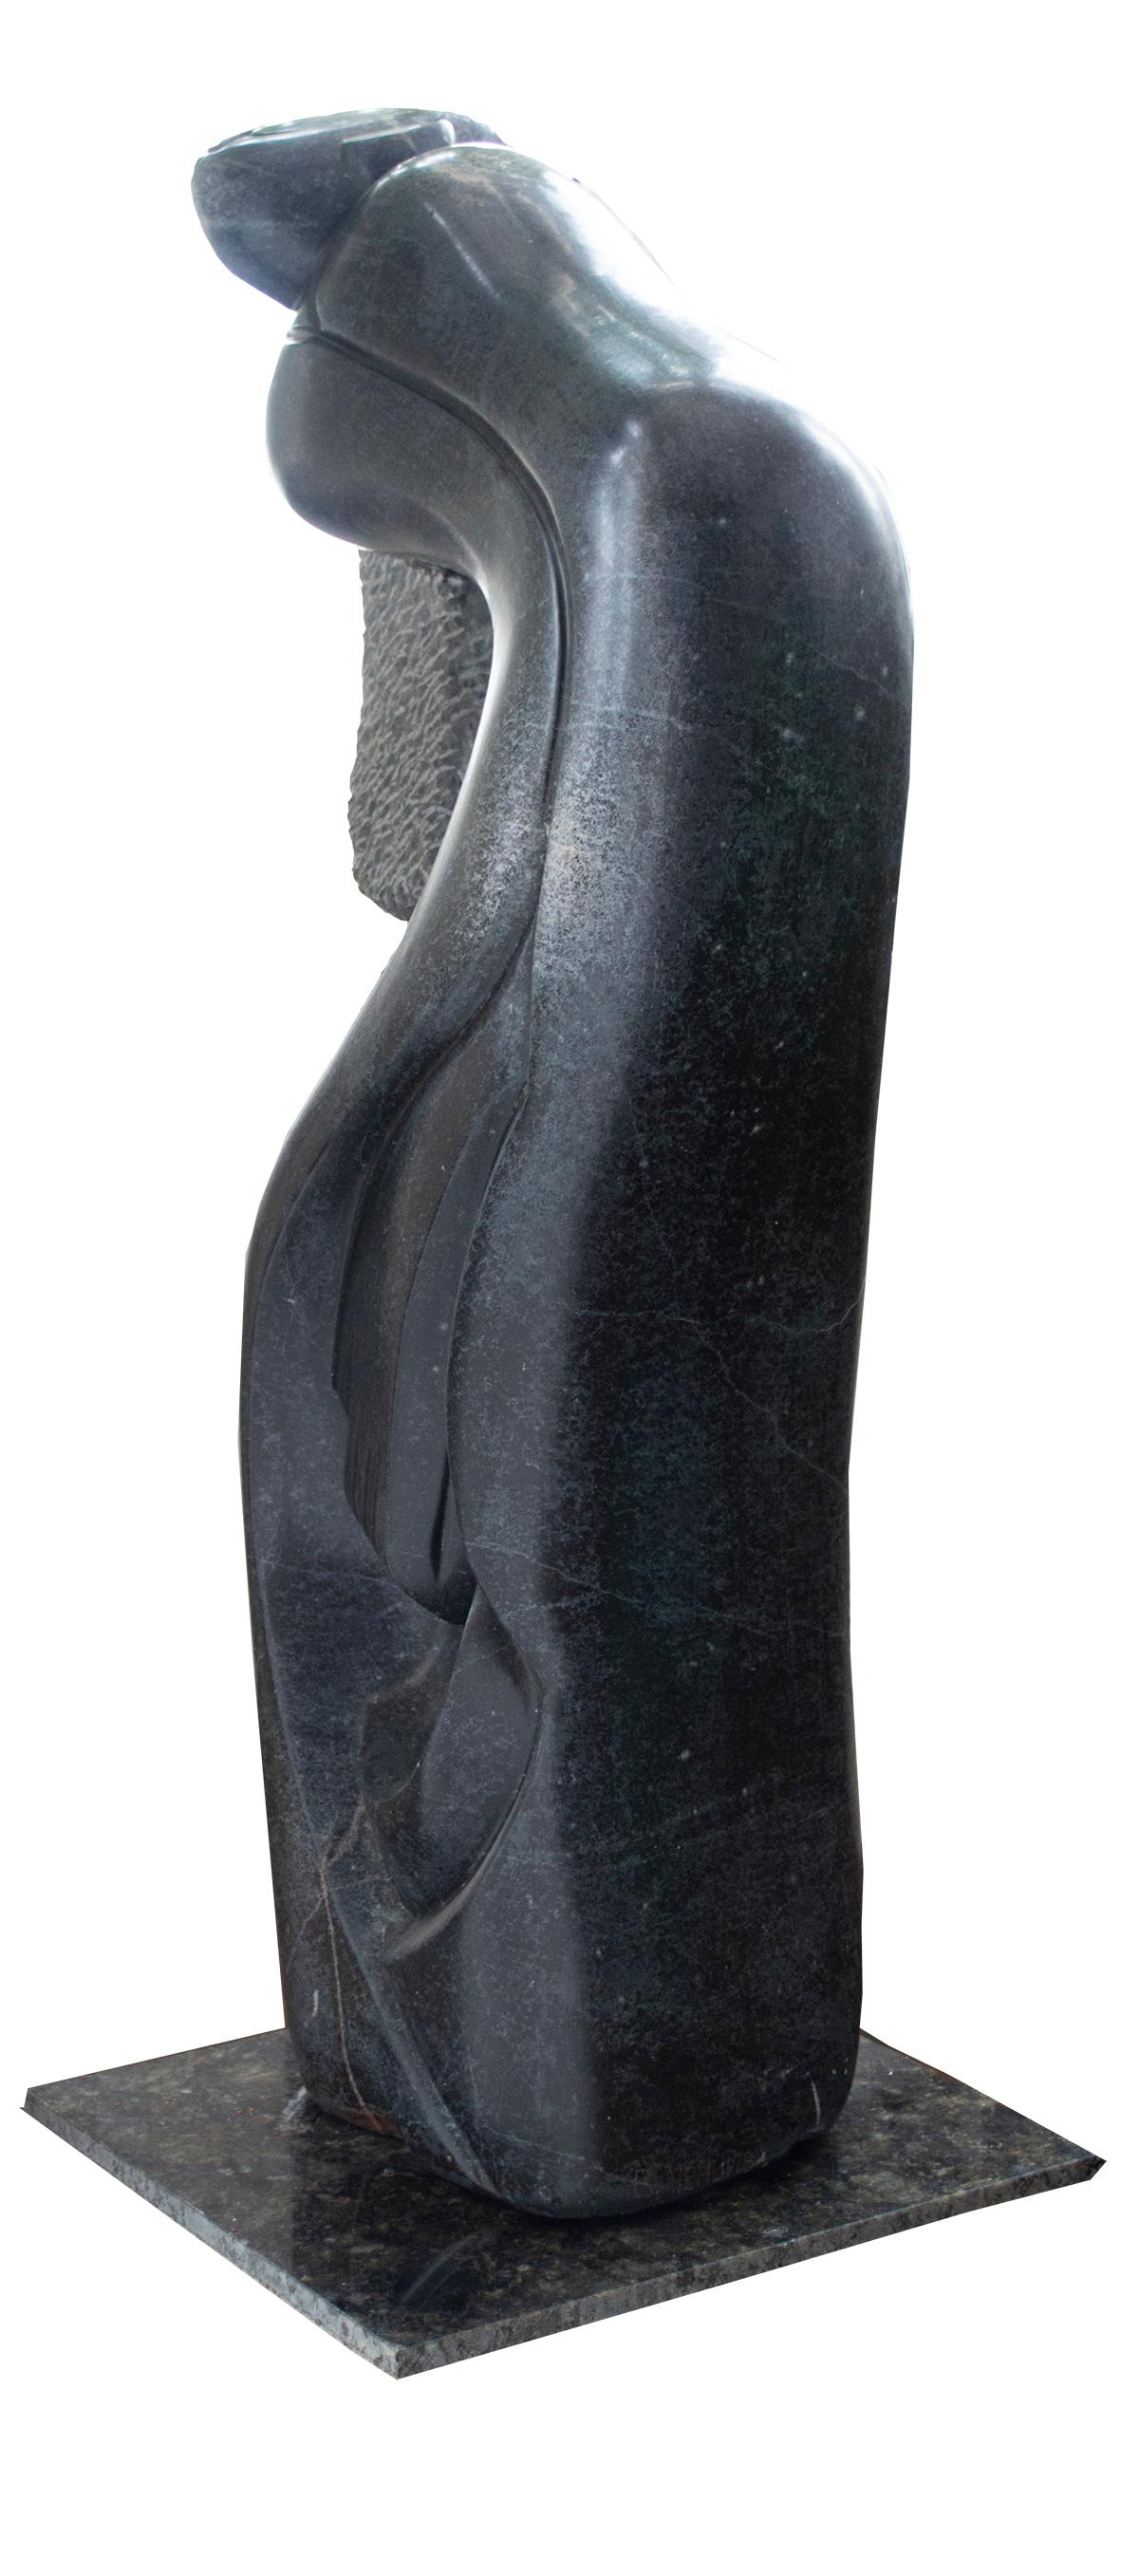 'Bride' is an original springstone sculpture signed by the Zimbabwean artist Brian Nehumba. Brian was trained in the Shona stone carving tradition and this is an excellent example of his work, combining abstract and human forms. The sculpture takes